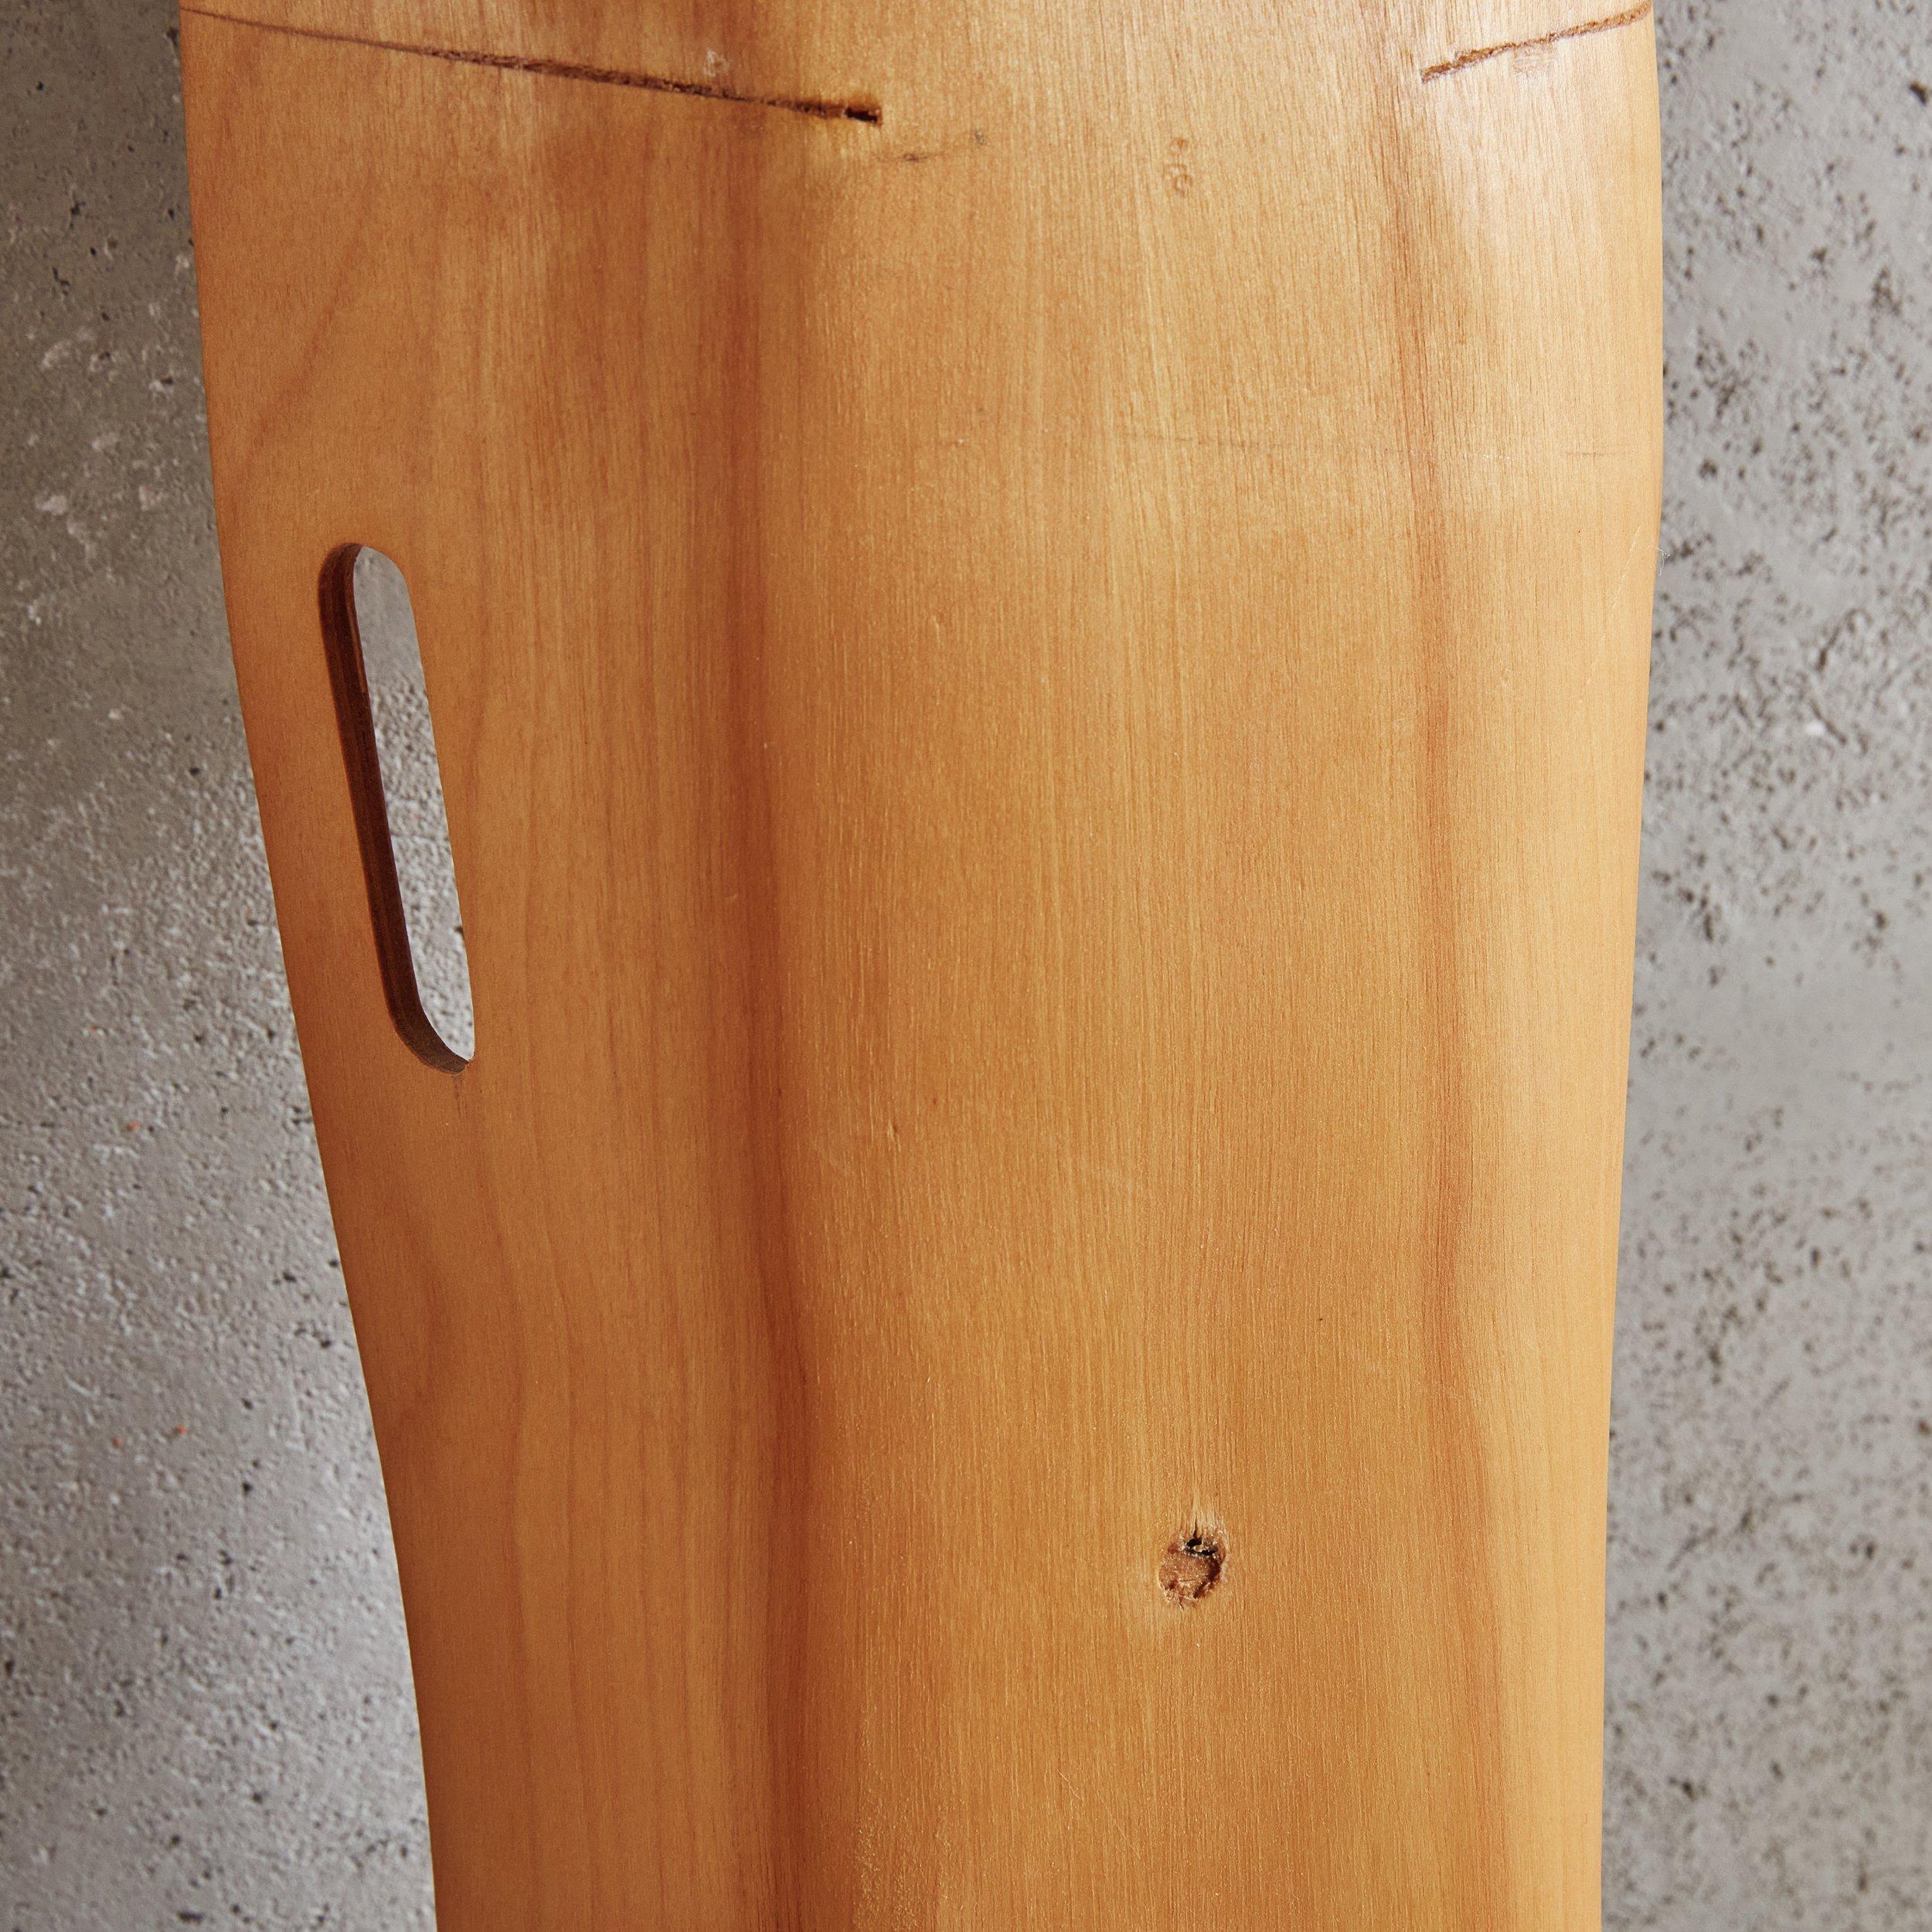 Single Leg Splint by Charles & Ray Eames for Evans Products Company, 1940s For Sale 4